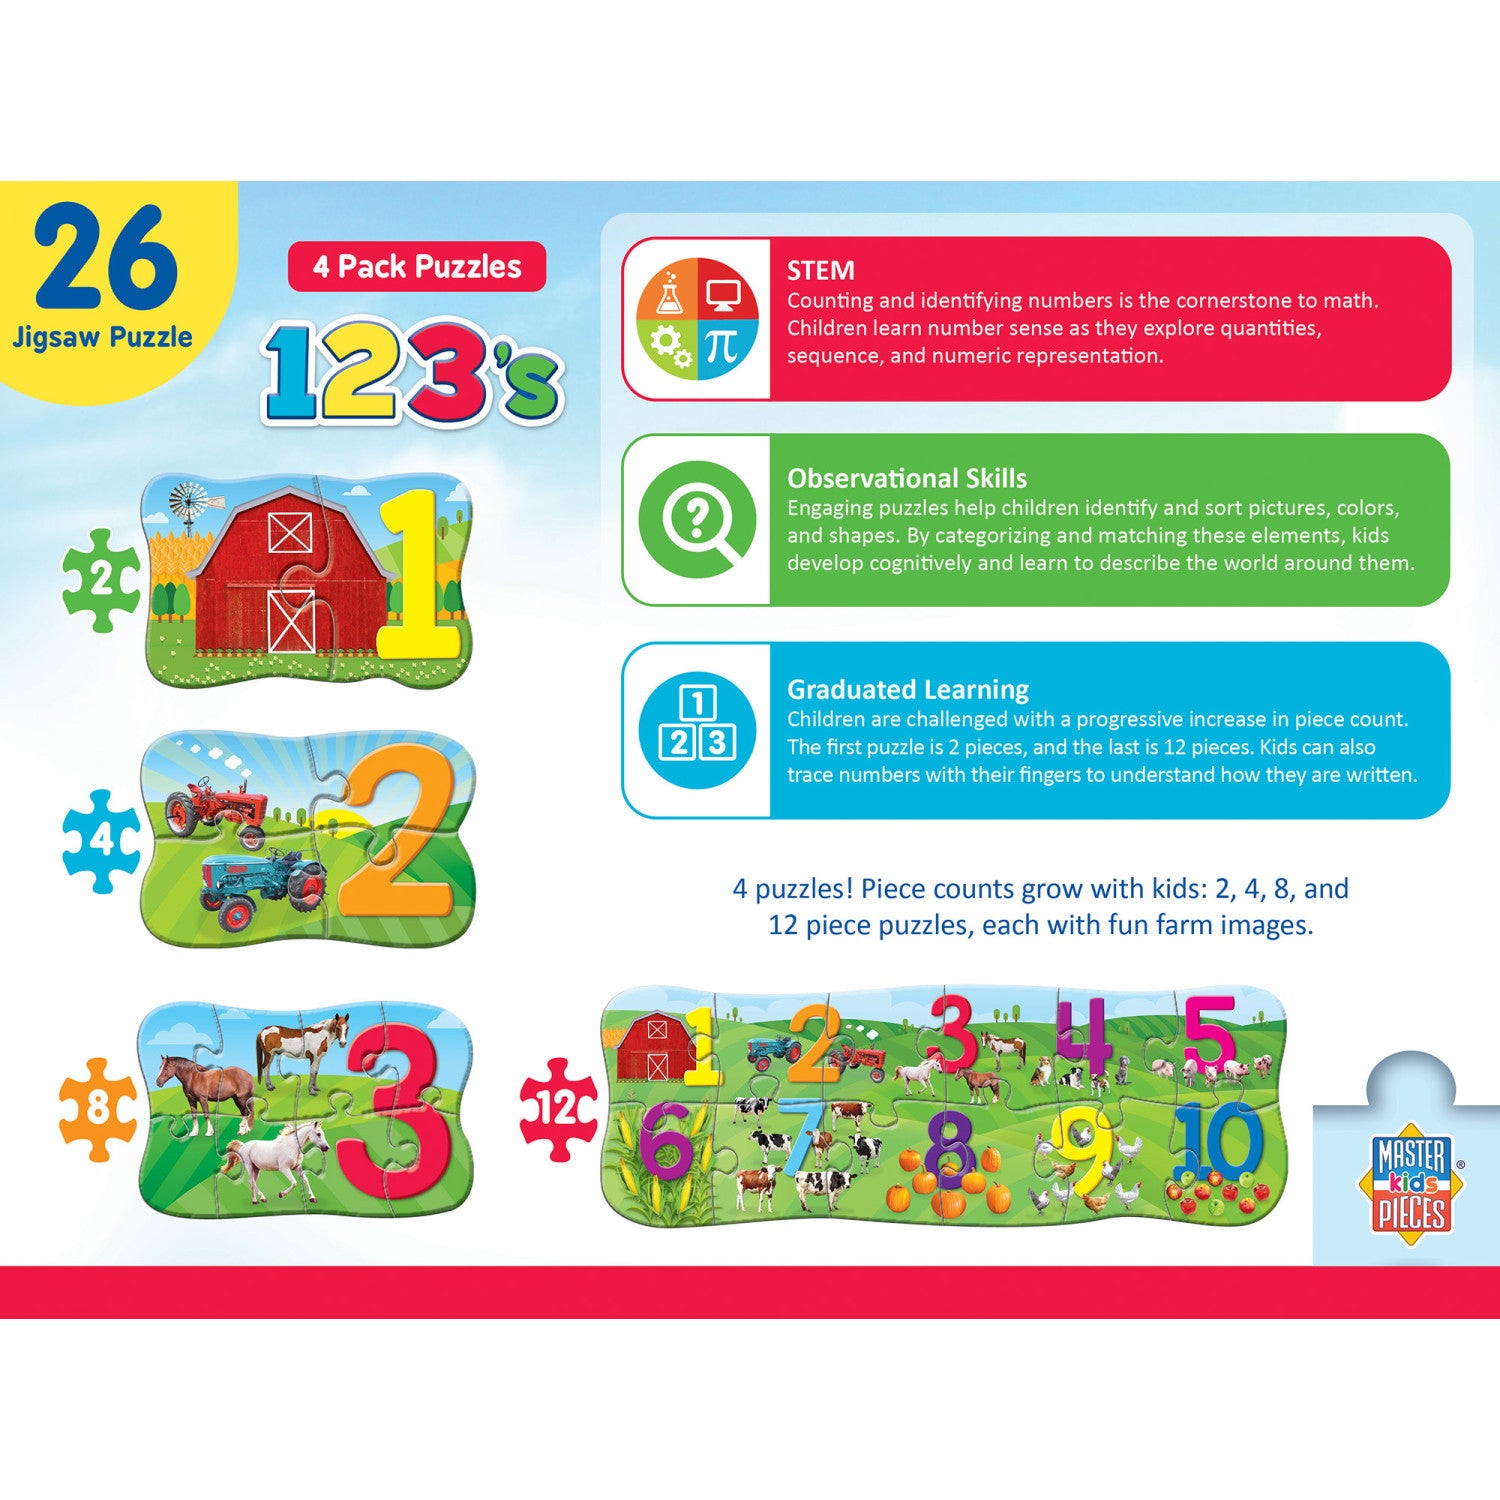 123's - Educational 4-Pack Jigsaw Puzzles